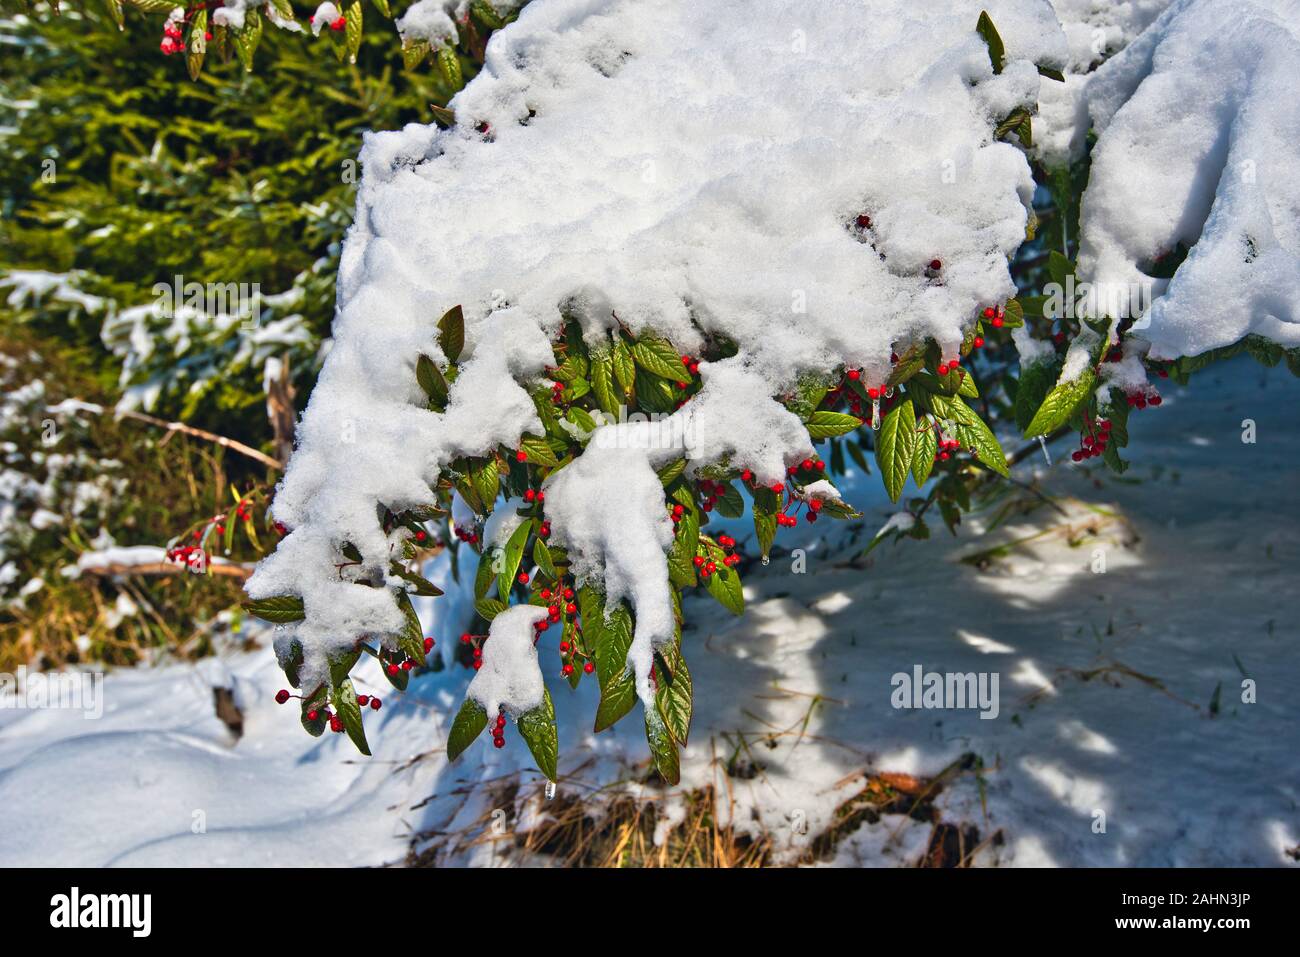 The branch of Wild Cotoneaster shrub is keeping green leaves and red berries in winter time, covered with snow in mountain forest Stock Photo